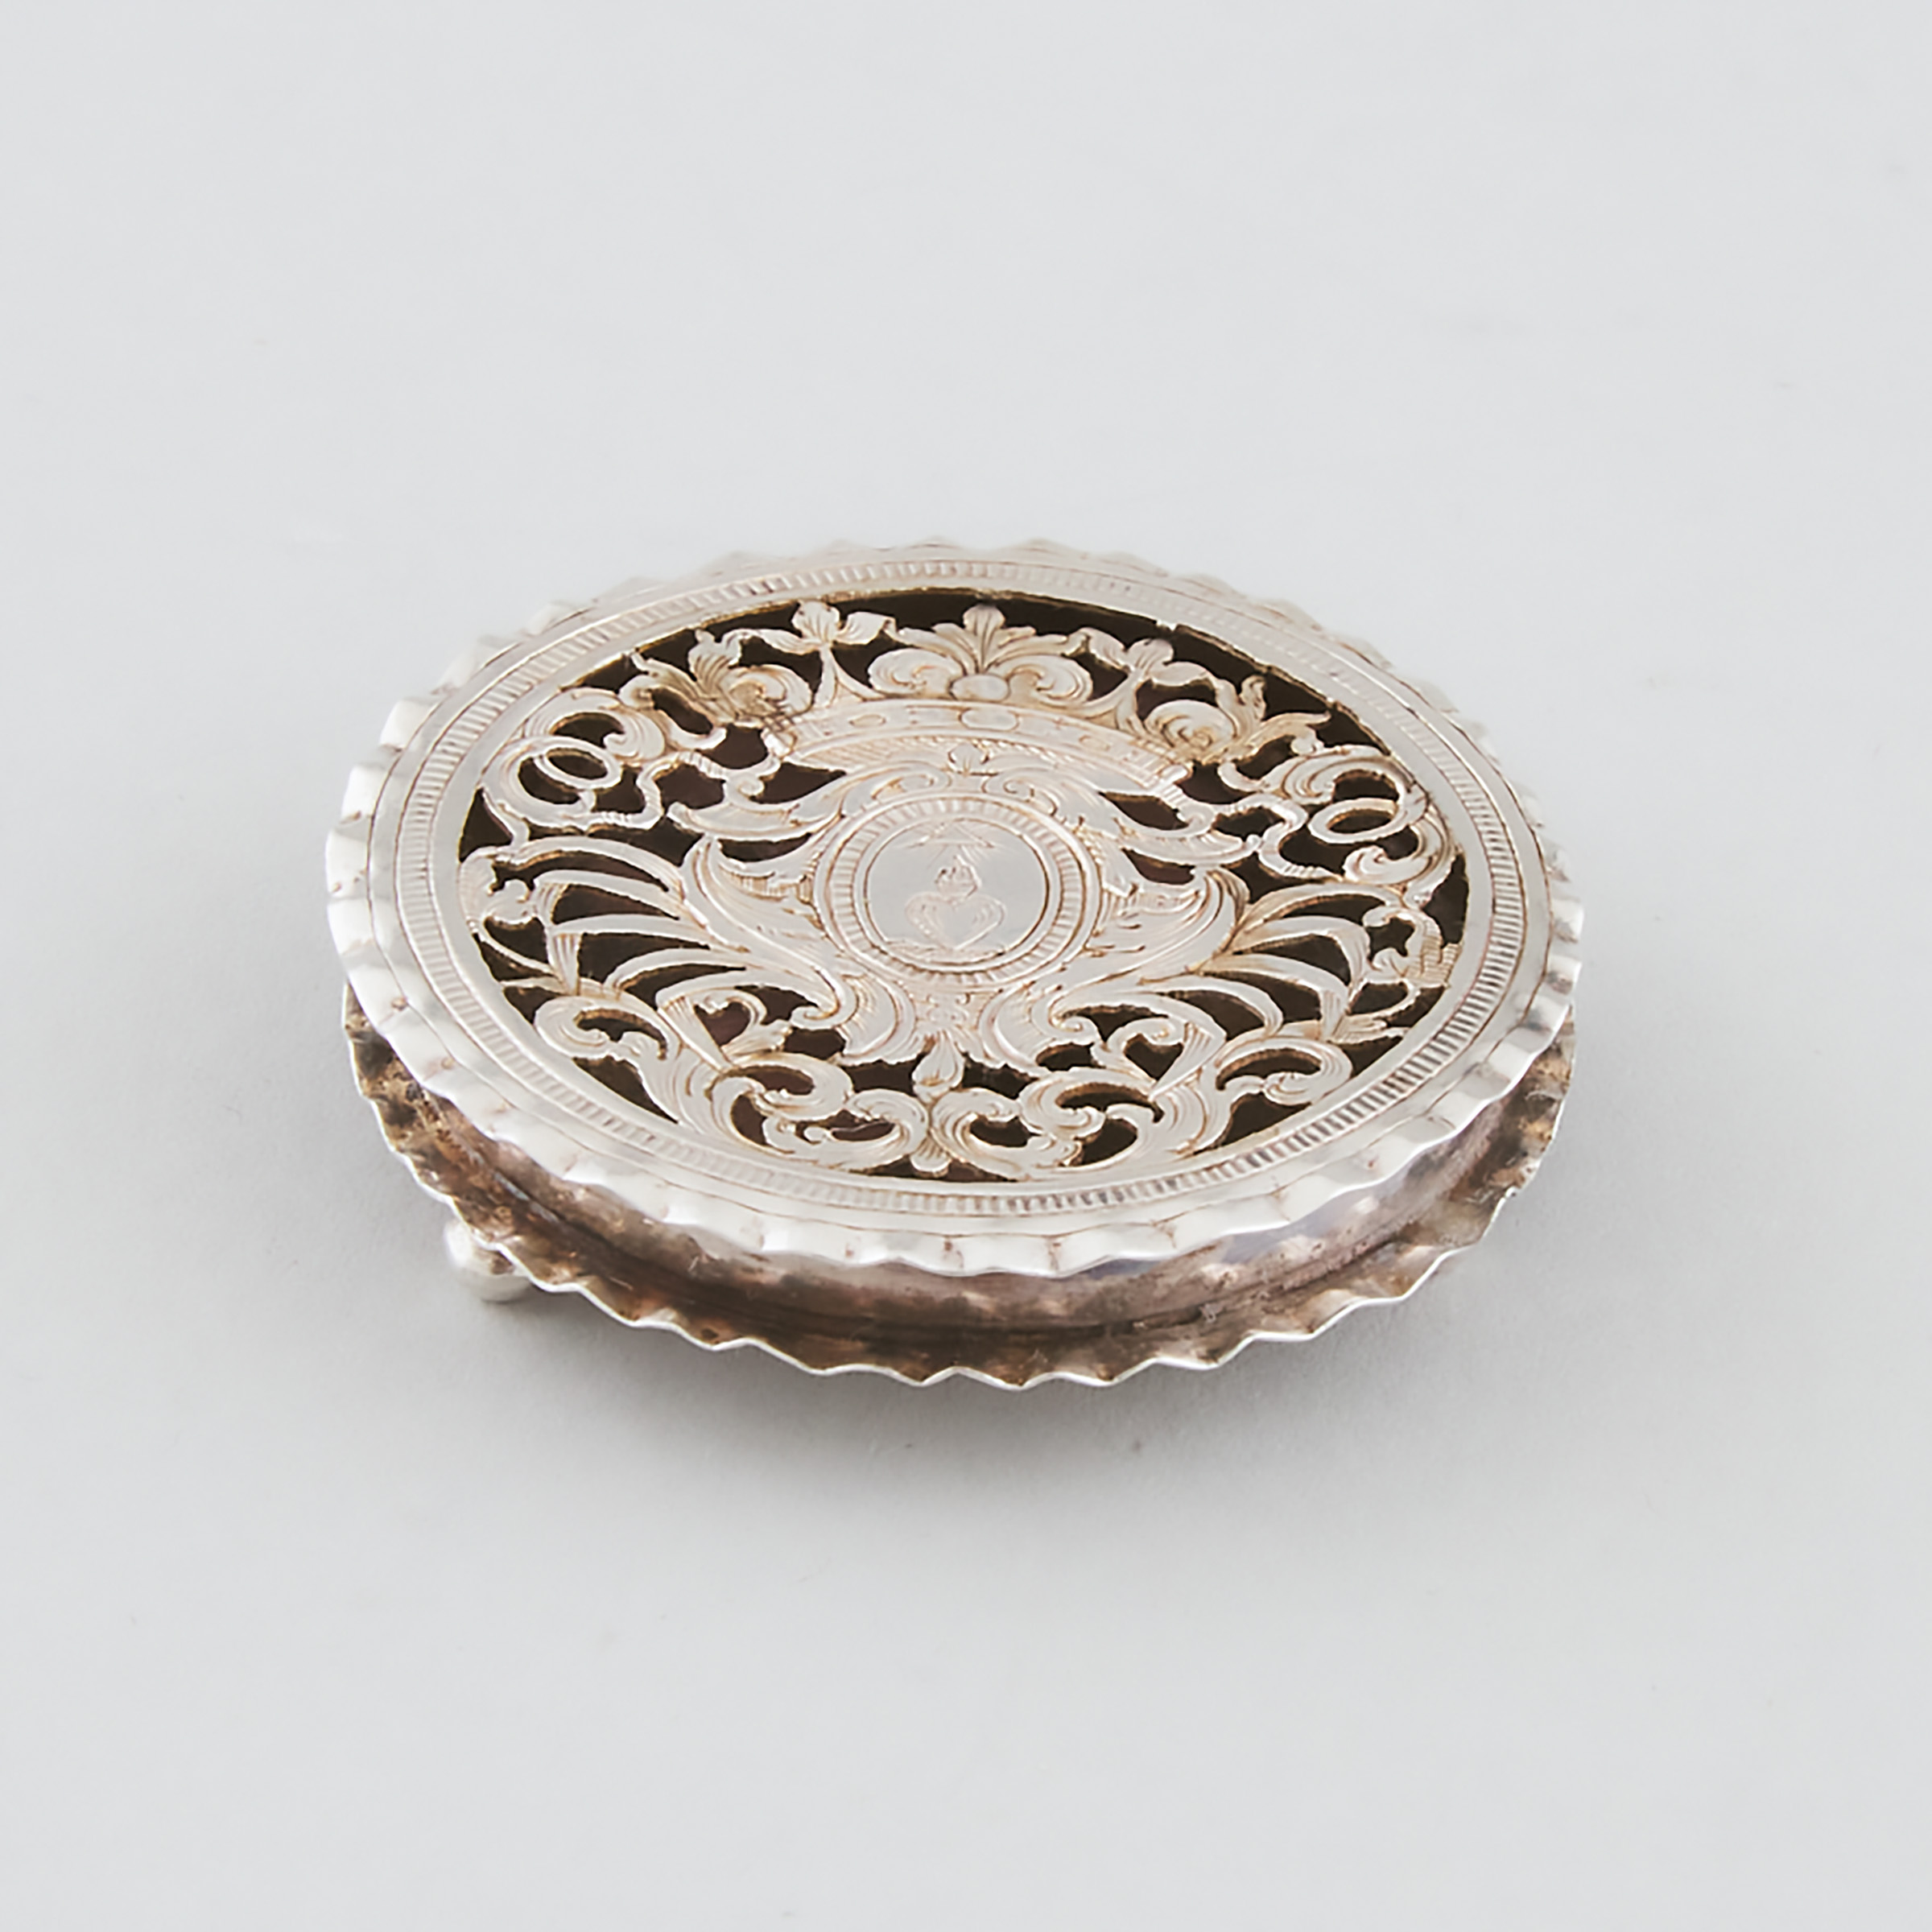 Late 17th Century English Silver